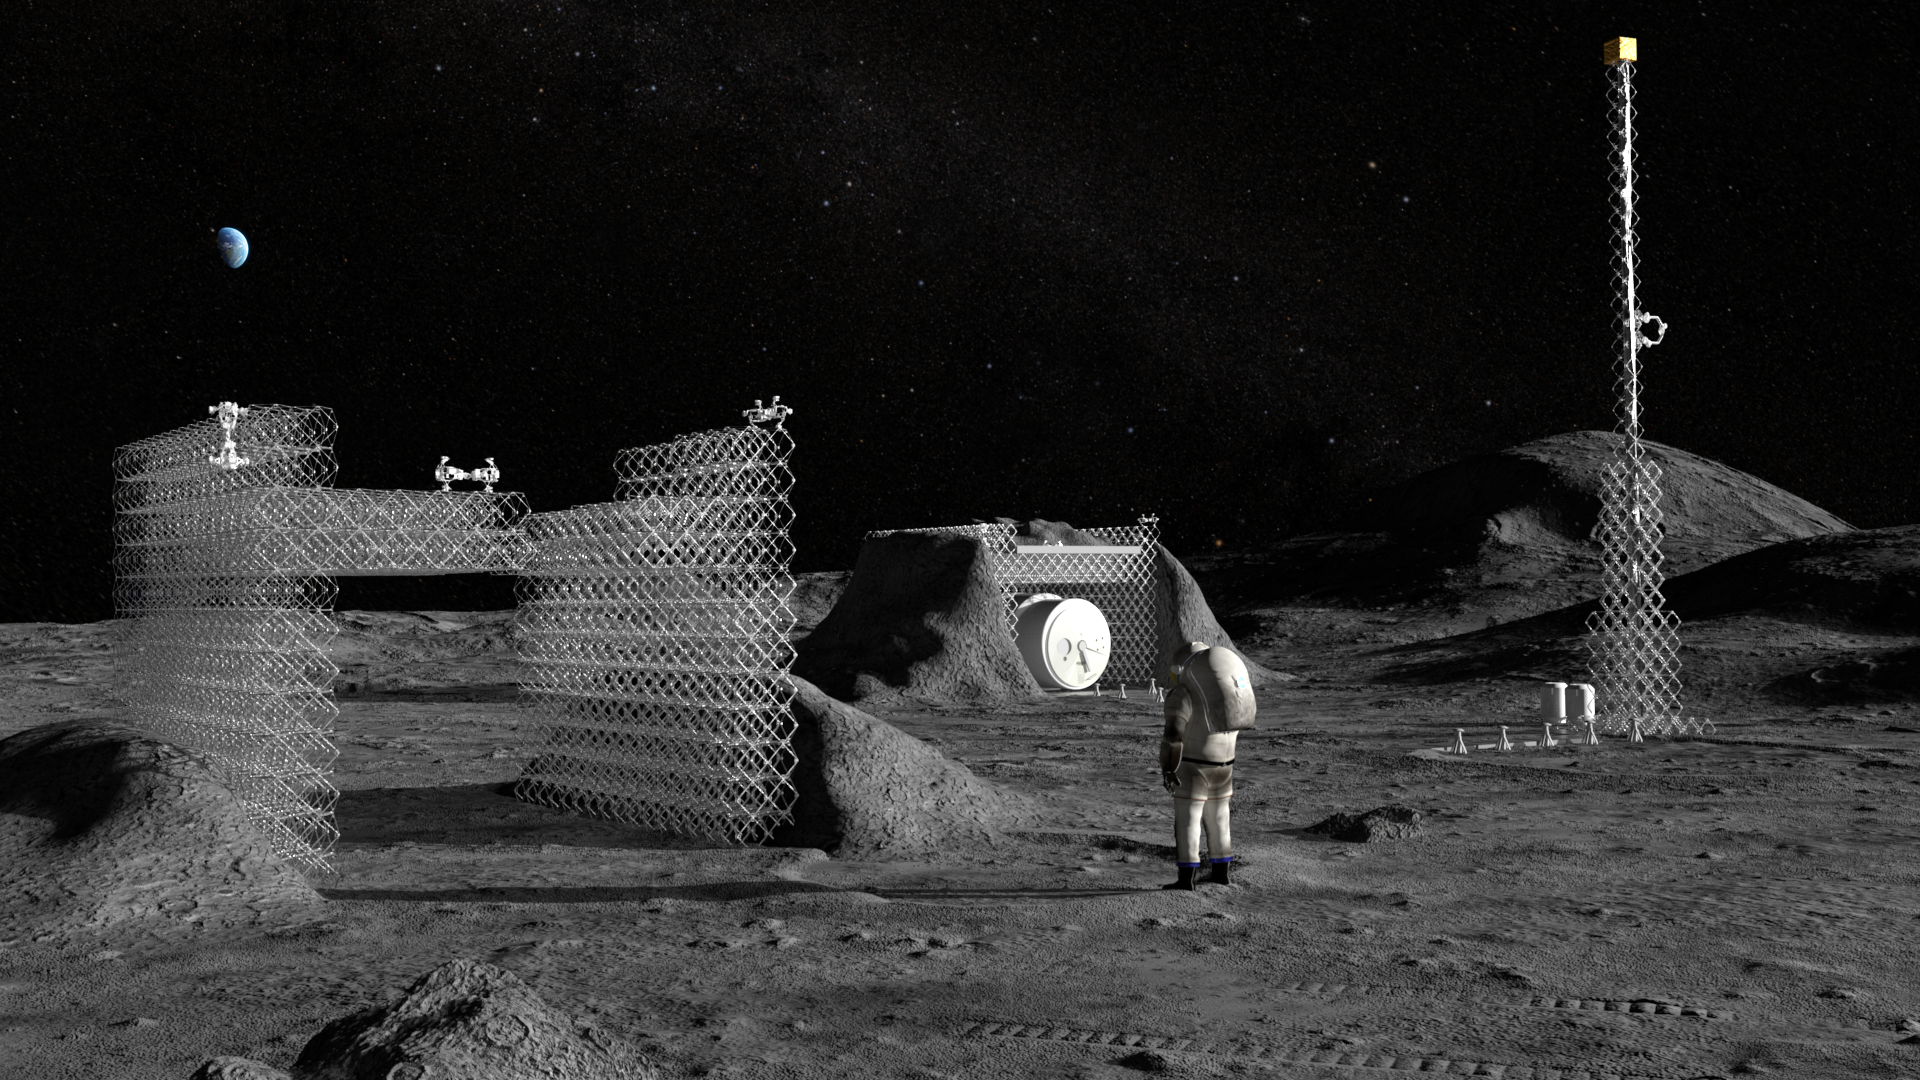 Illustration of an astronaut in a spacesuit standing on the lunar surface near structures being built by small robots.